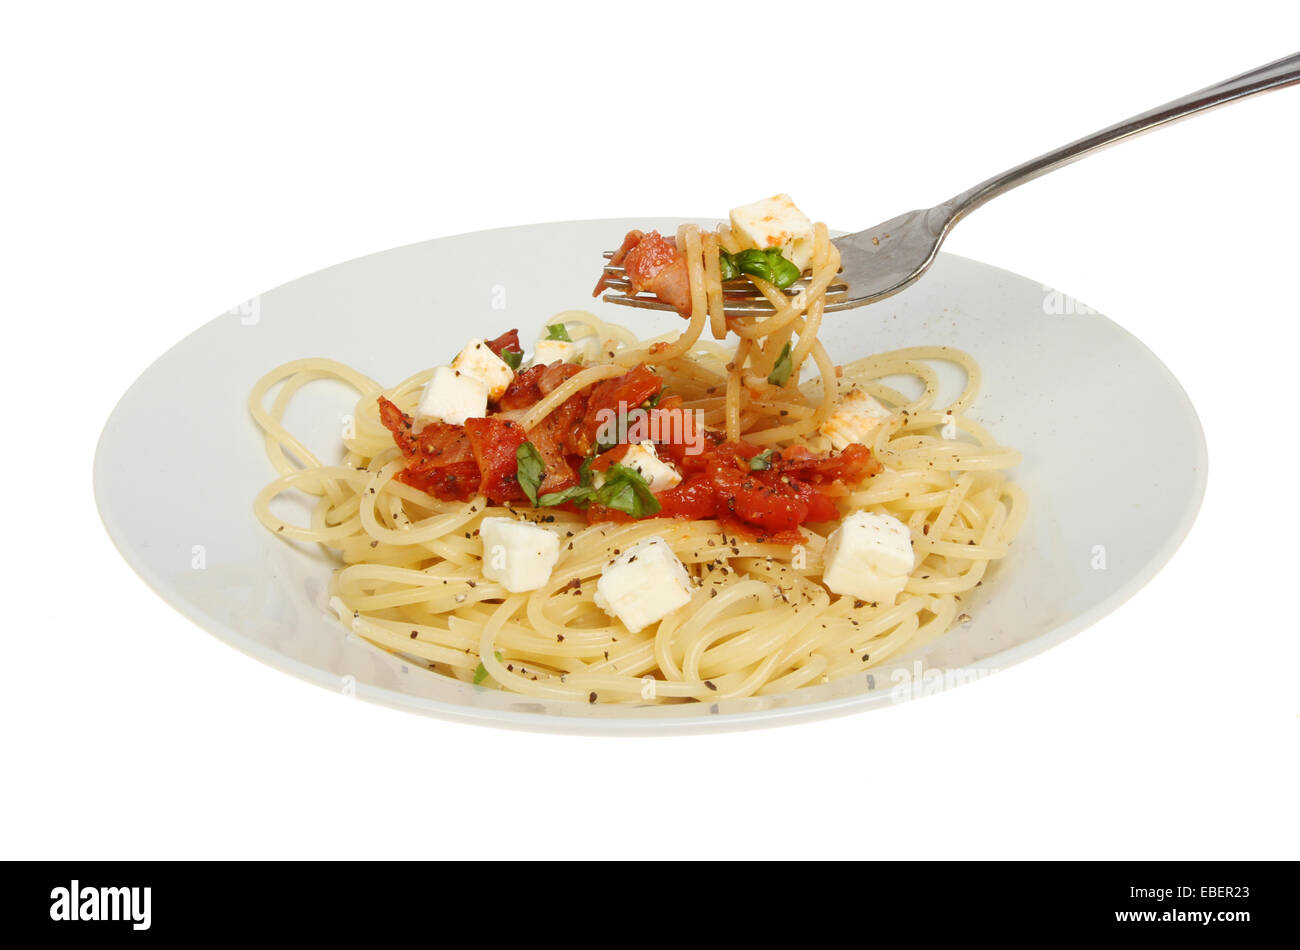 Plate of spaghetti with a fork isolated against white Stock Photo